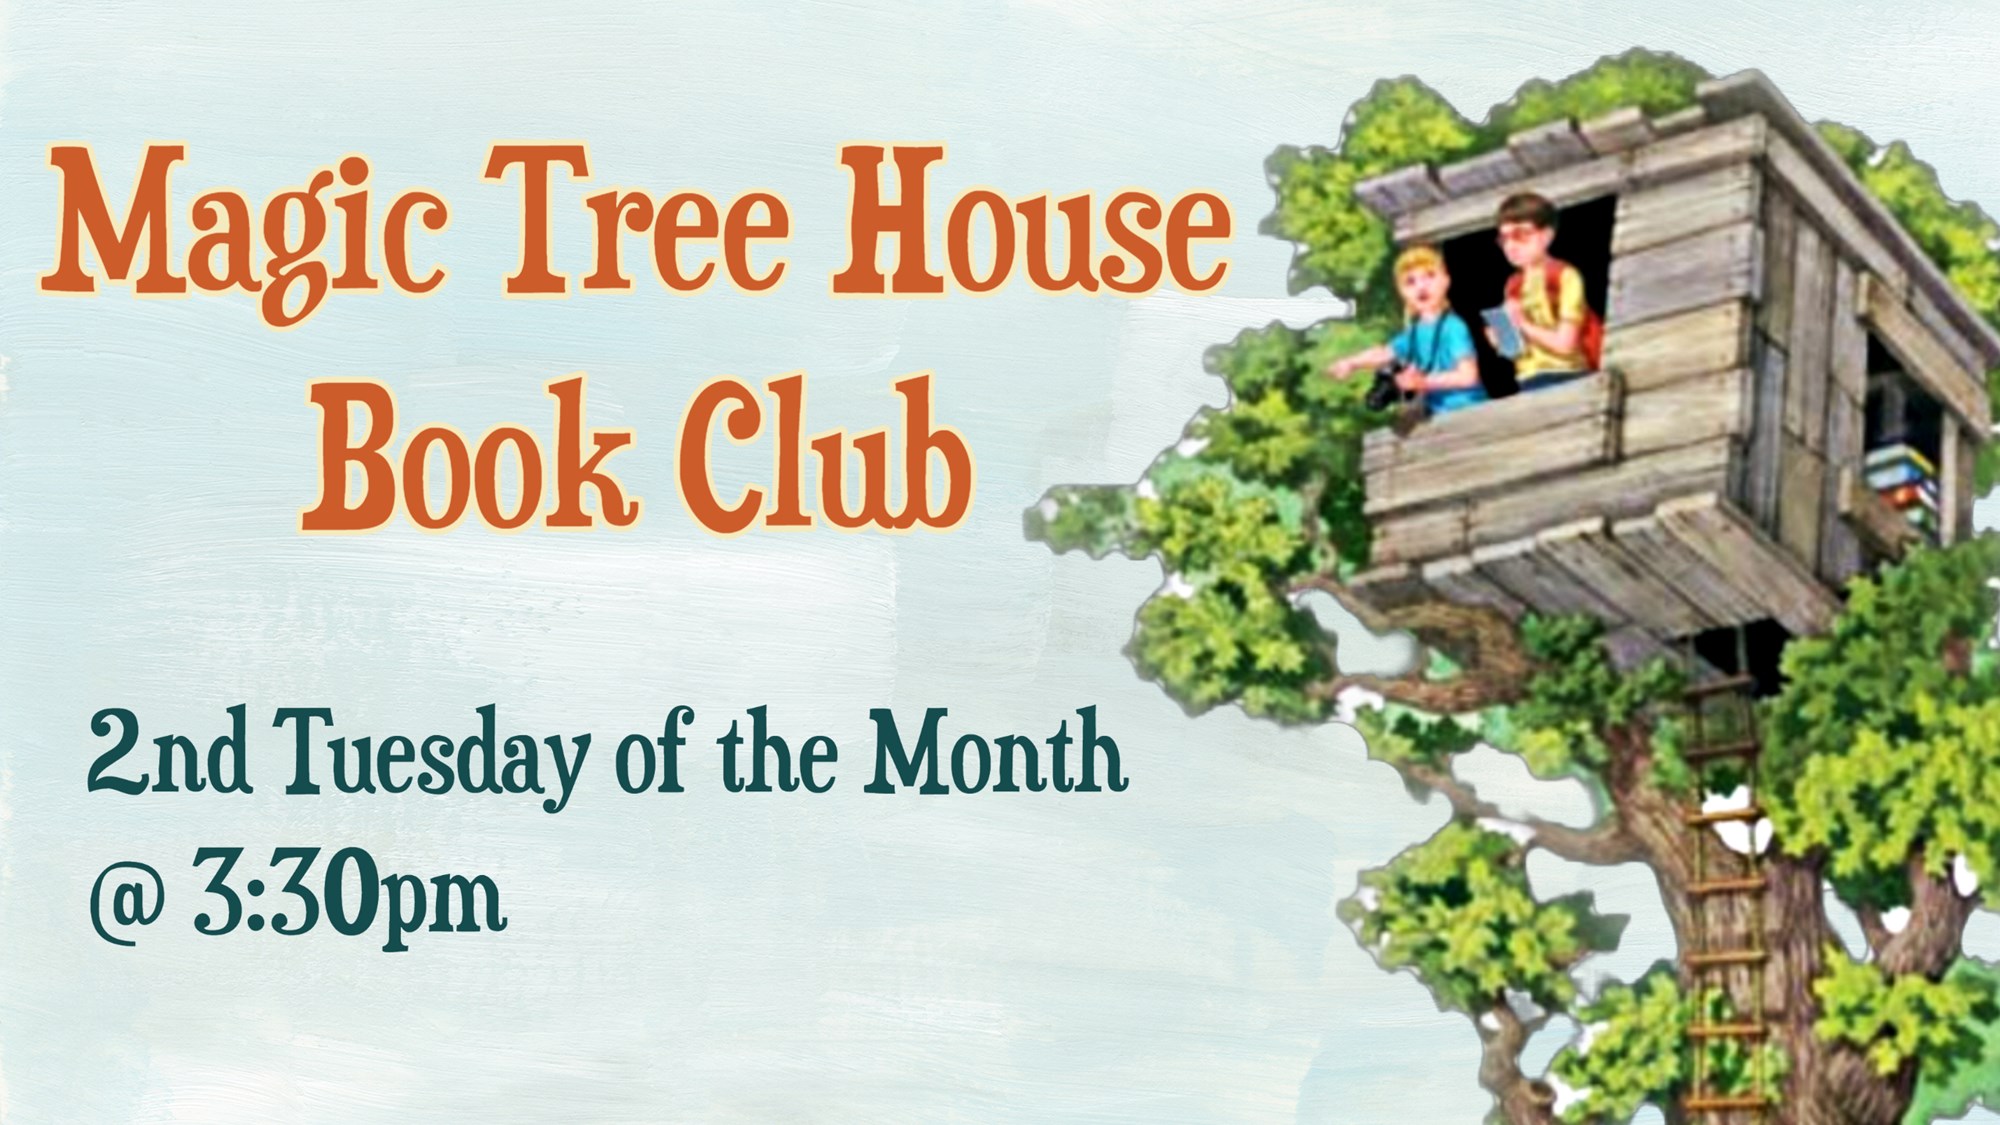 Magic Tree House Book Club 2nd Tuesday of the Month @ 3:30 PM. 